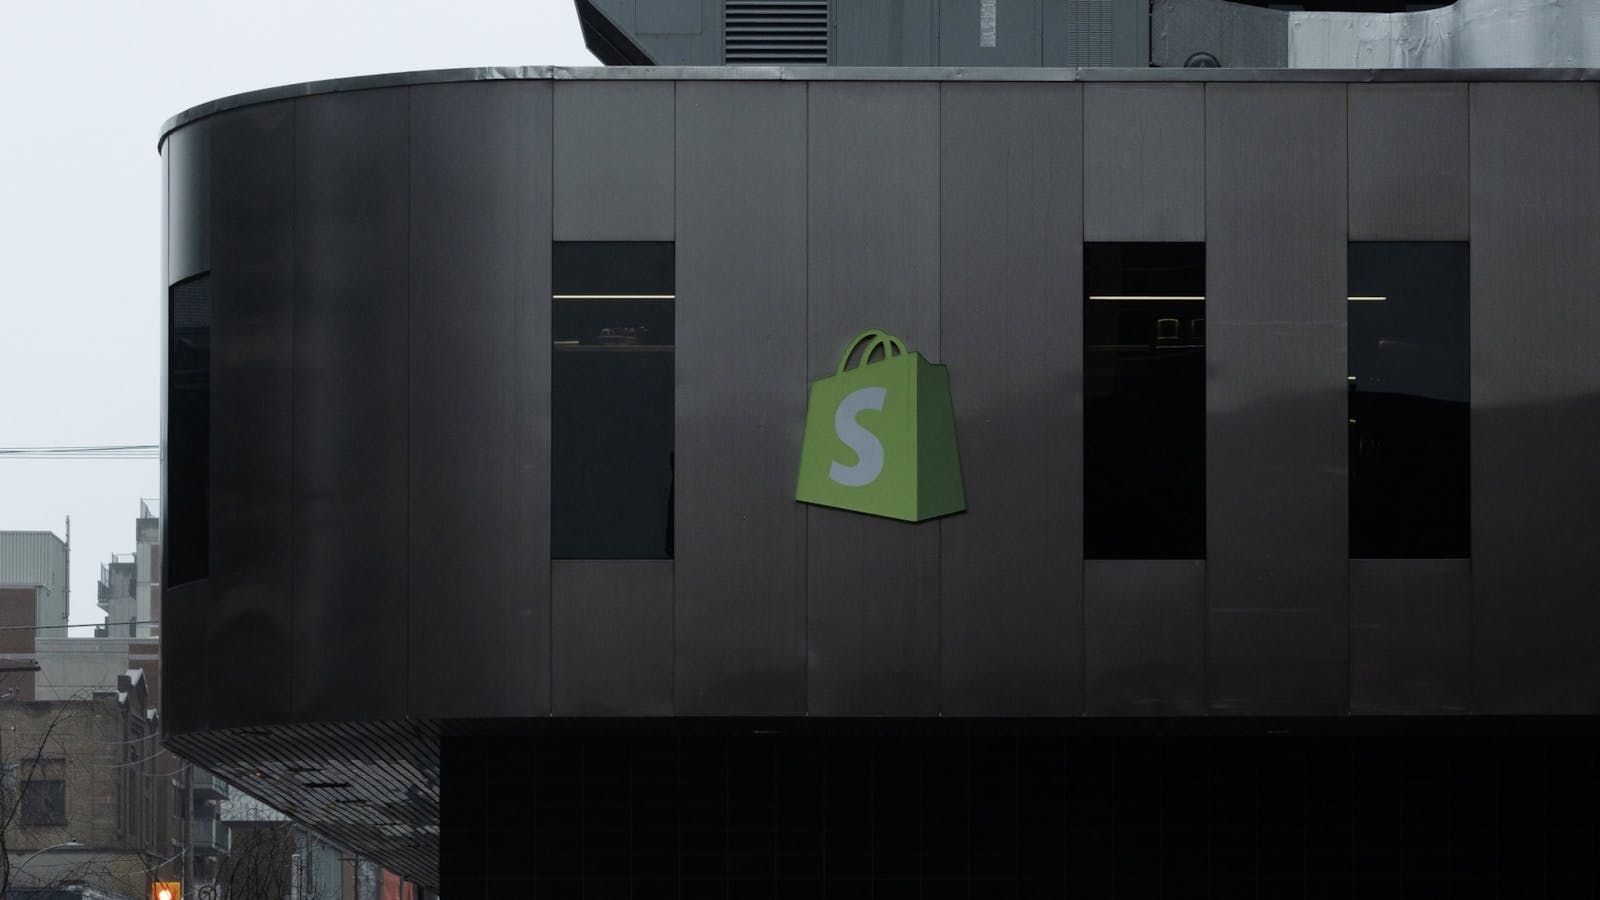 Shopify's headquarters in Canada. Photo by Bloomberg.